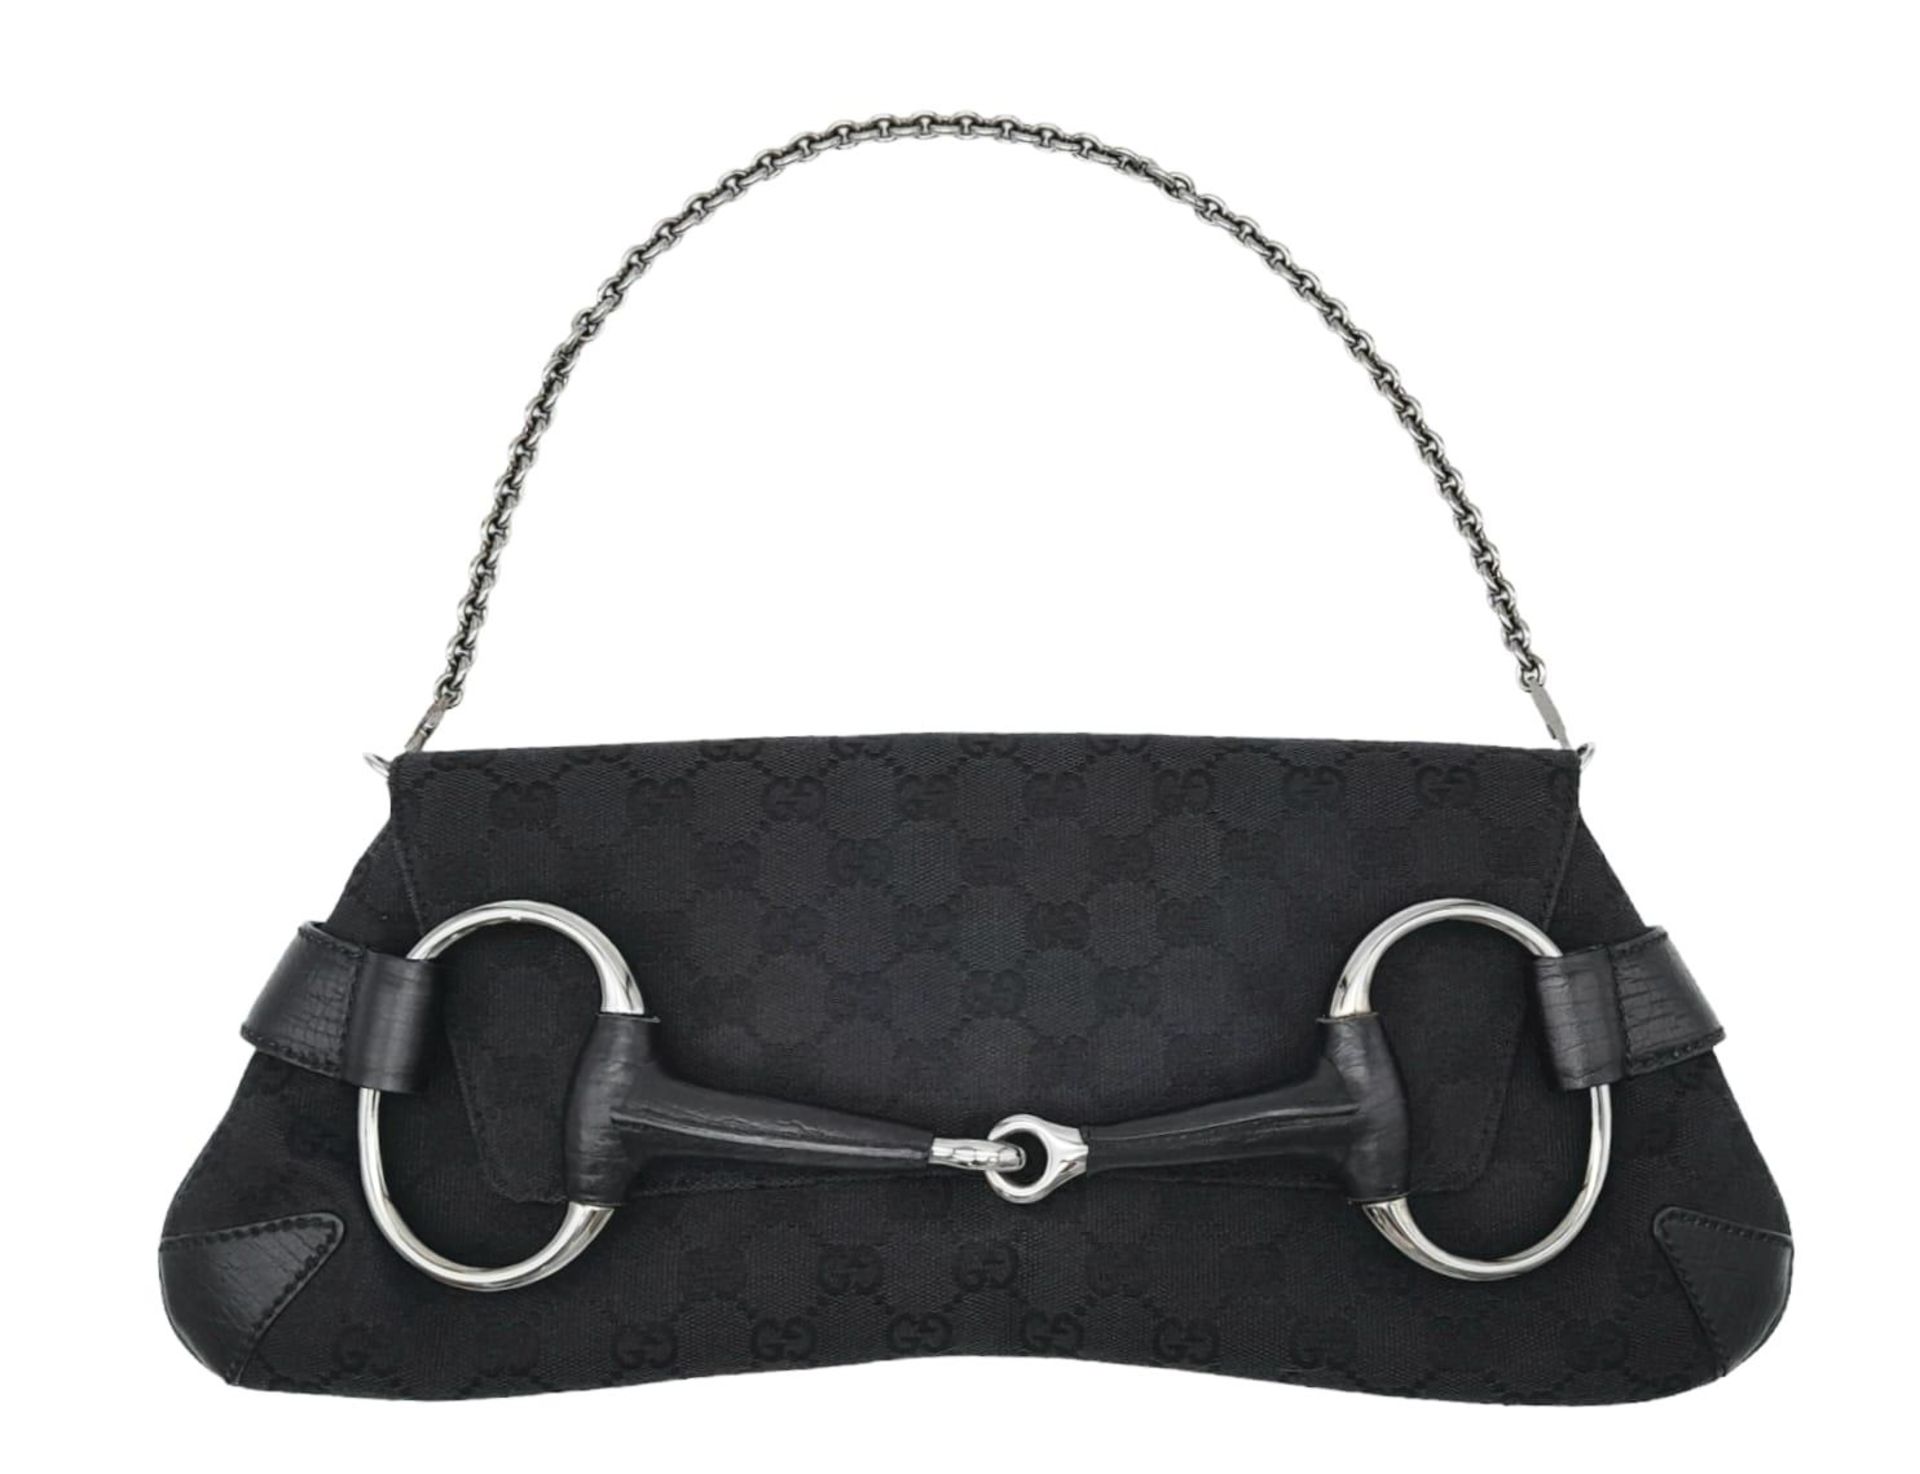 A Gucci GG black canvas bag featuring the black and gunmetal grey horsebit and metal shoulder strap.